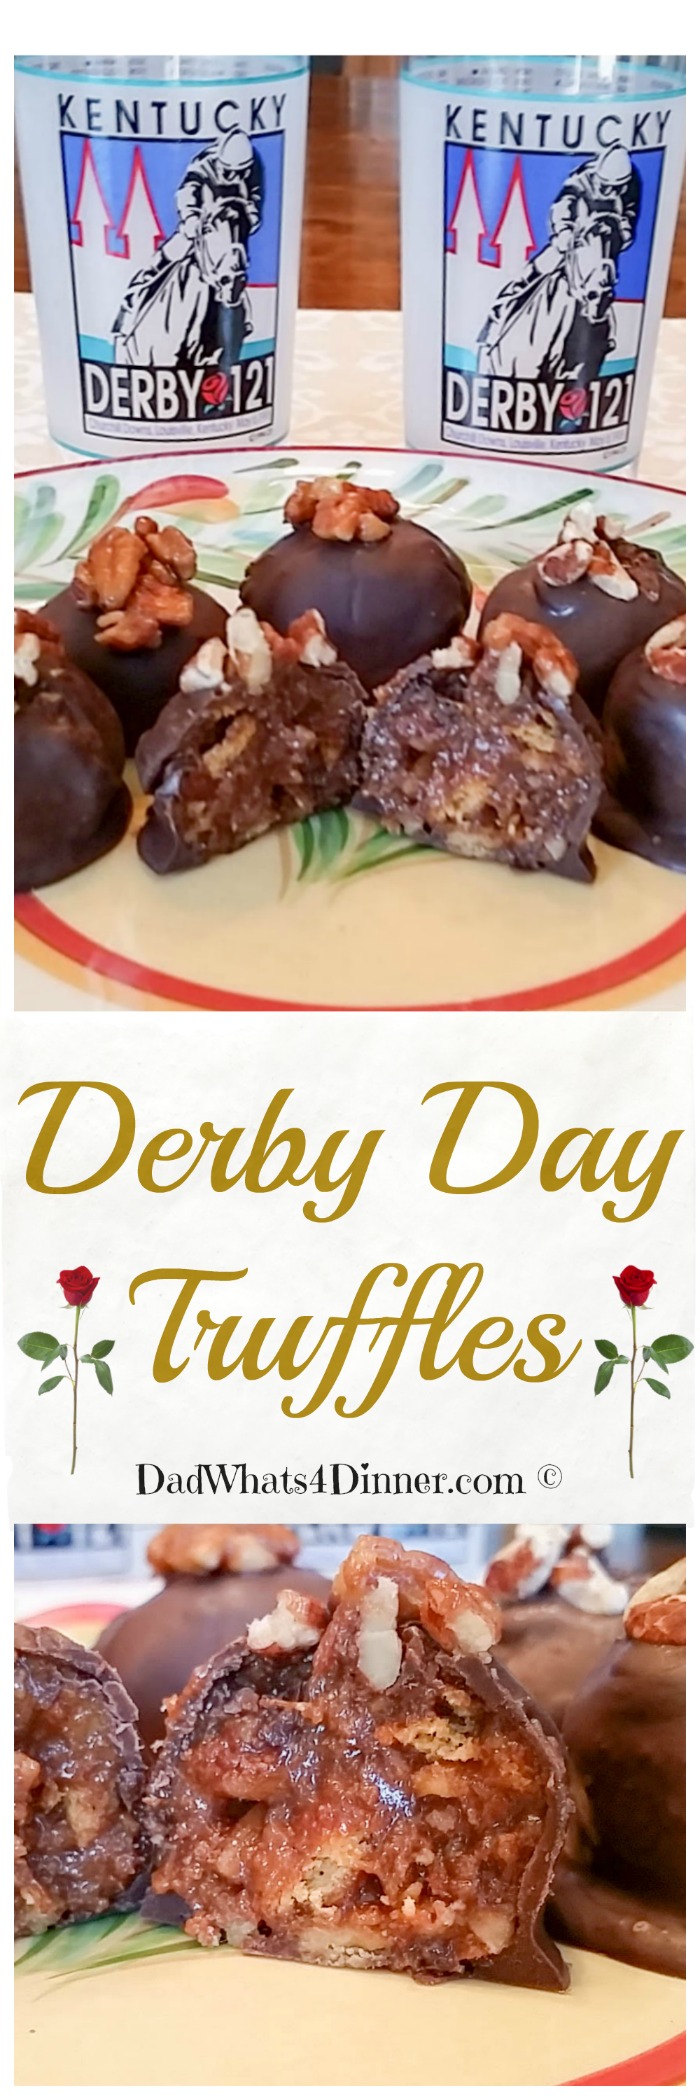 Derby Day Truffles are very decadent, elegant and exquisite to look at. You will be the hit of your Kentucky Derby Party, I guarantee it!